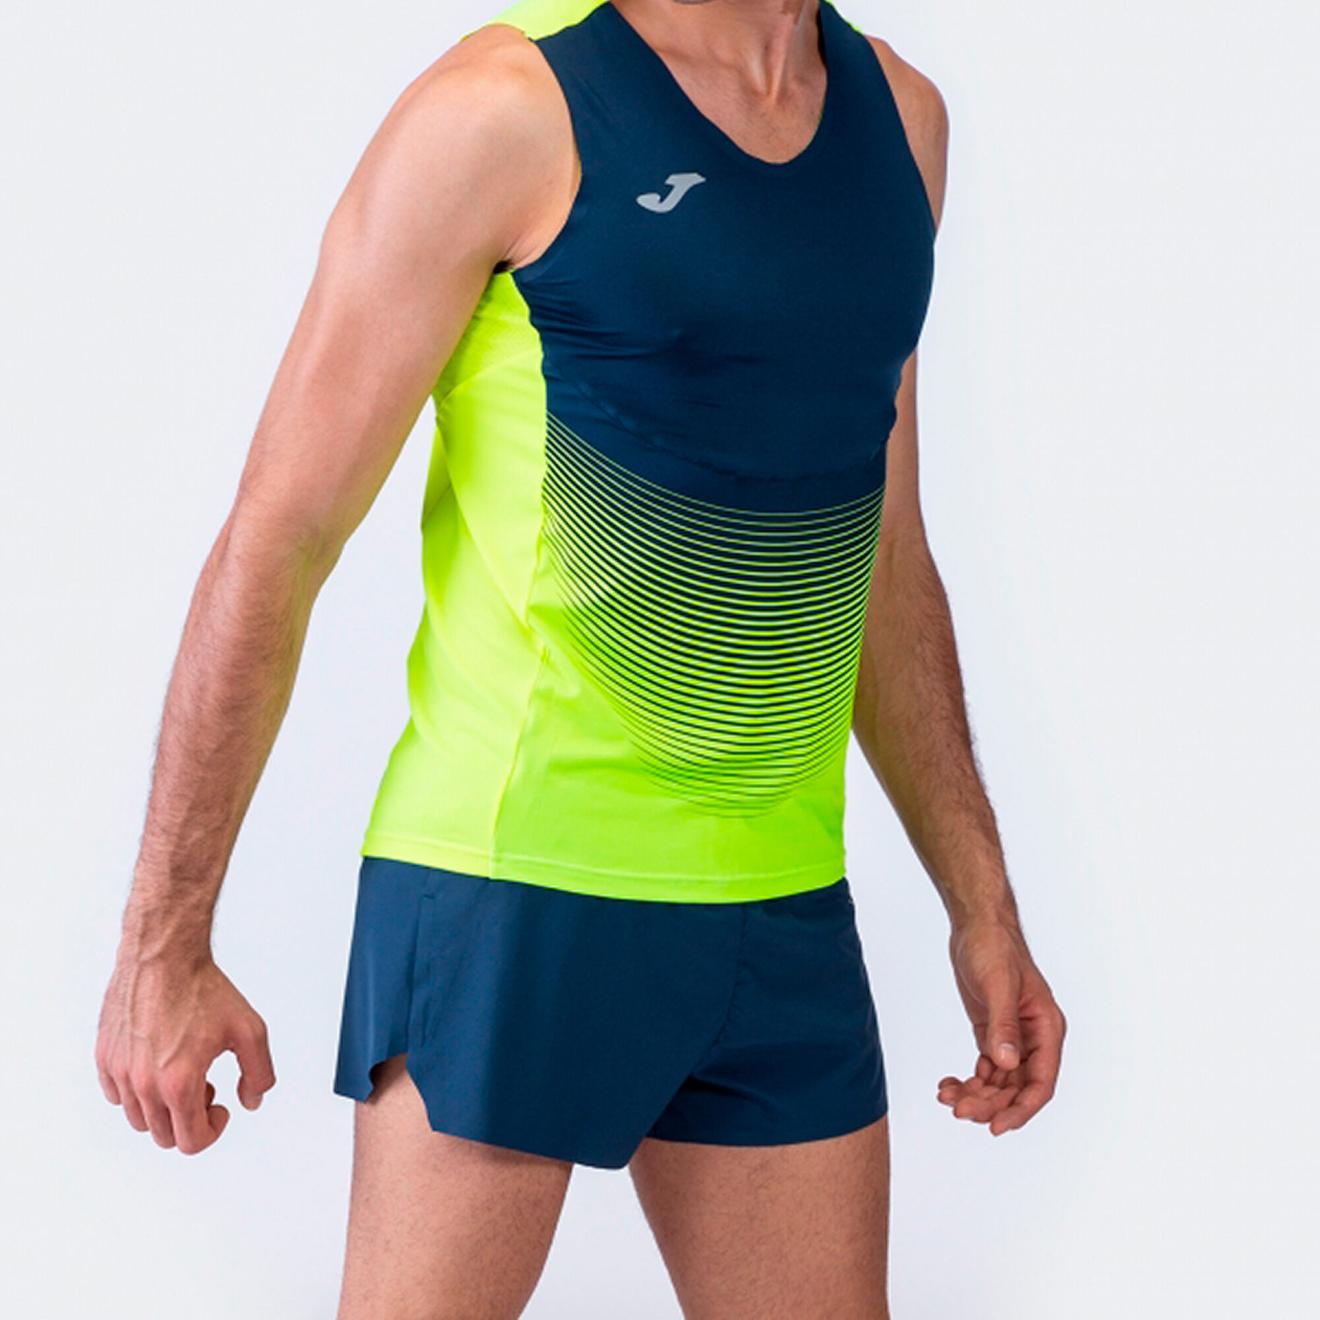 Sleeveless t-shirt man Elite VI yellow navy blue offers at £13.5 in Joma